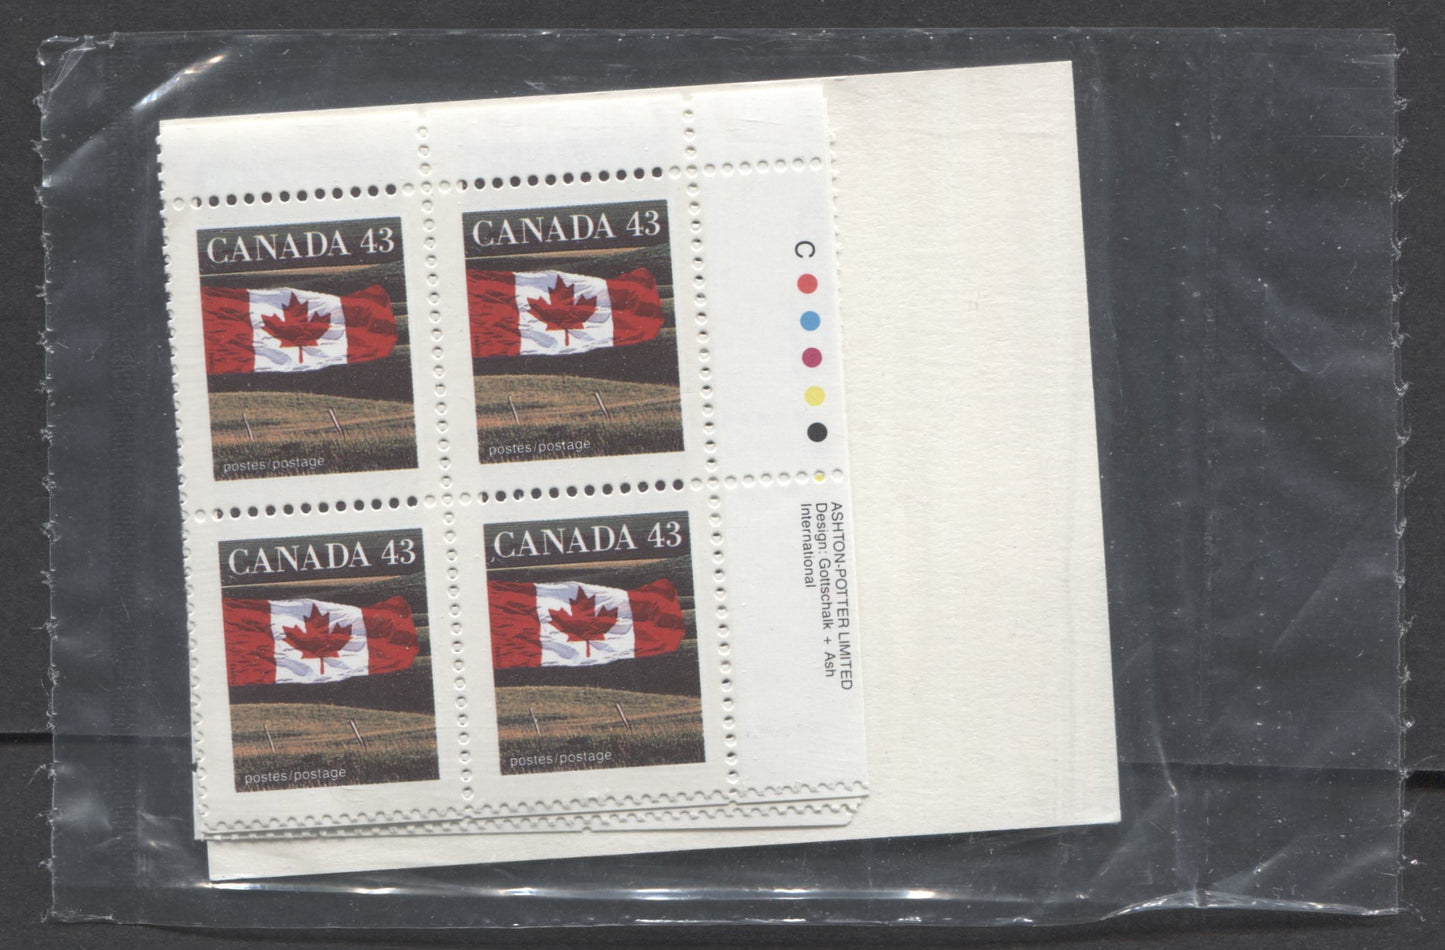 Lot 35 Canada #1359 43c Multicoloured 1992 Domestic First-Class Rate Issue, Canada Post Sealed Pack of Inscription Blocks, Ashton Potter Printing On DF CPP Paper, With HB Type 6A Insert Card, VFNH, Unitrade Cat. $25